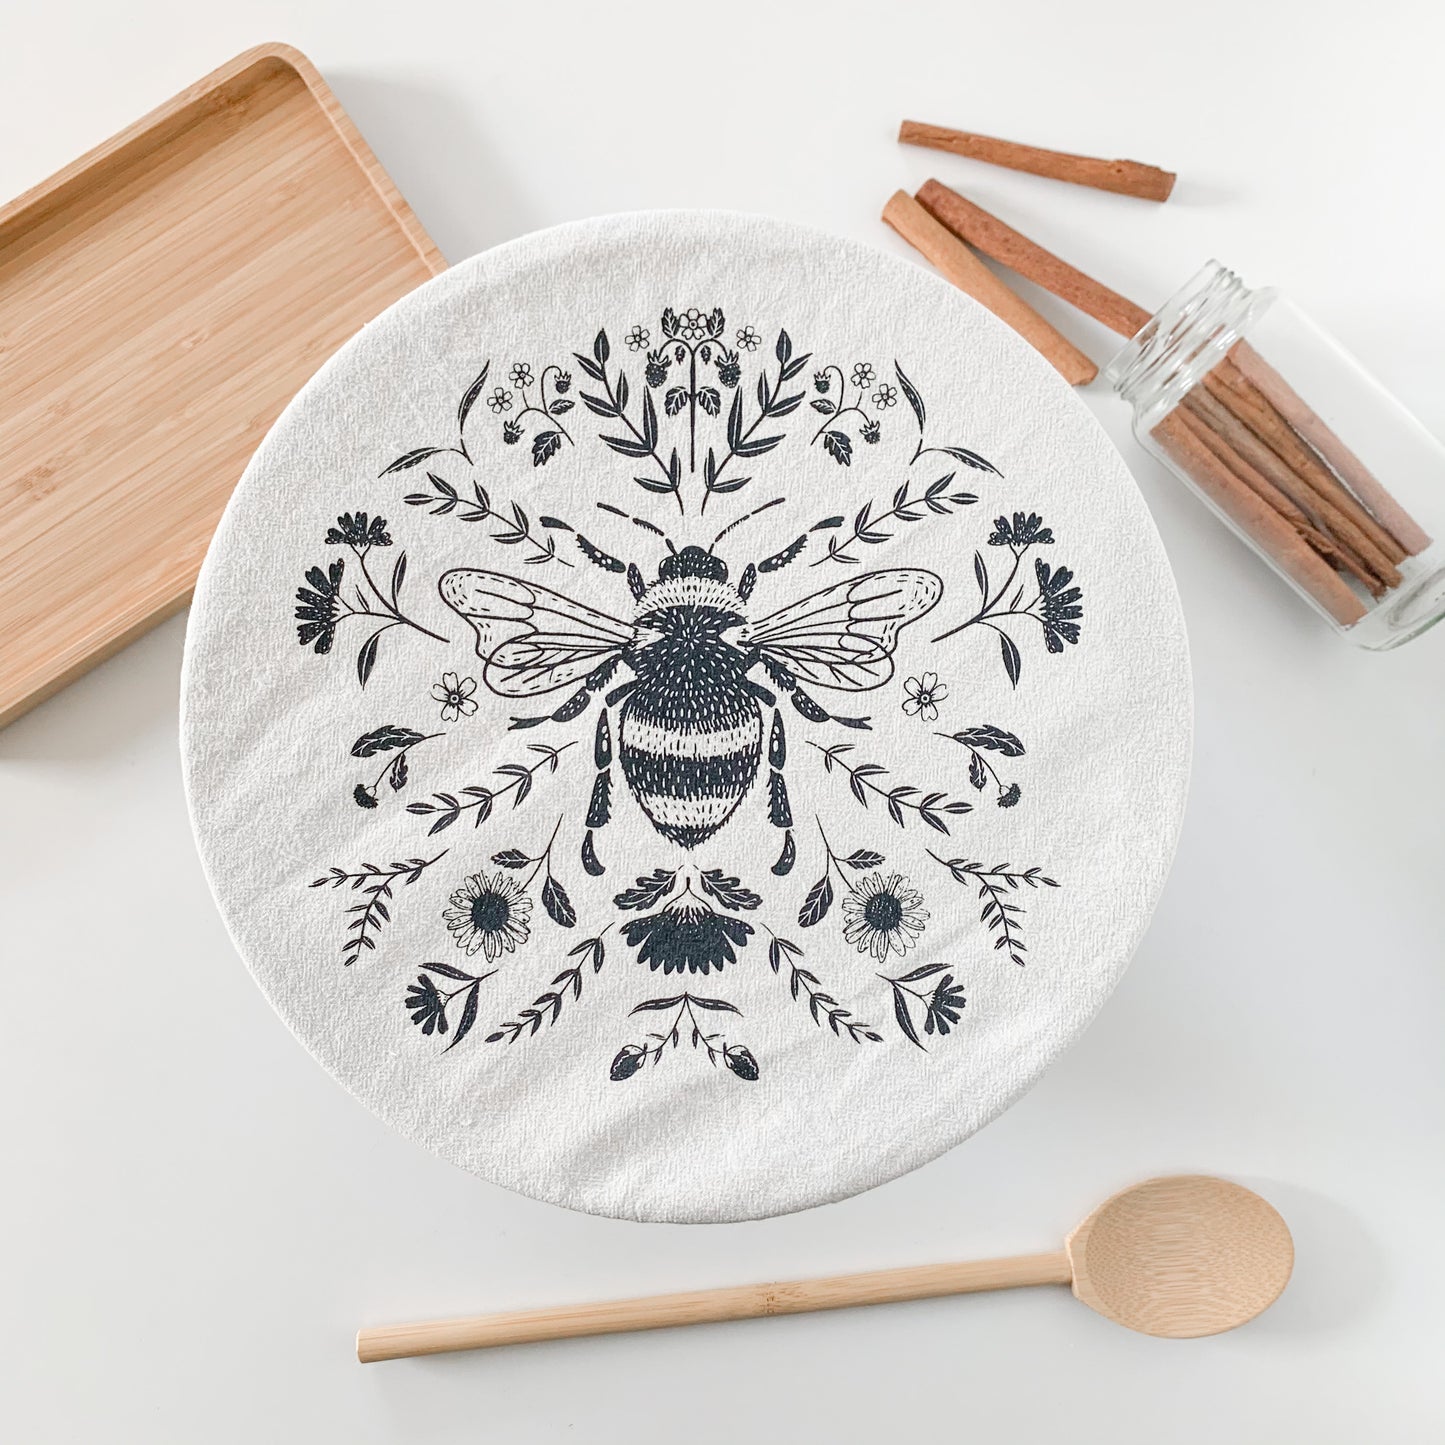 A cotton Bowl Cover with a bee and flower design printed on it. There's a mixing spoon, a small bamboo tray, and some cinnamon sticks laying around the bowl cover.